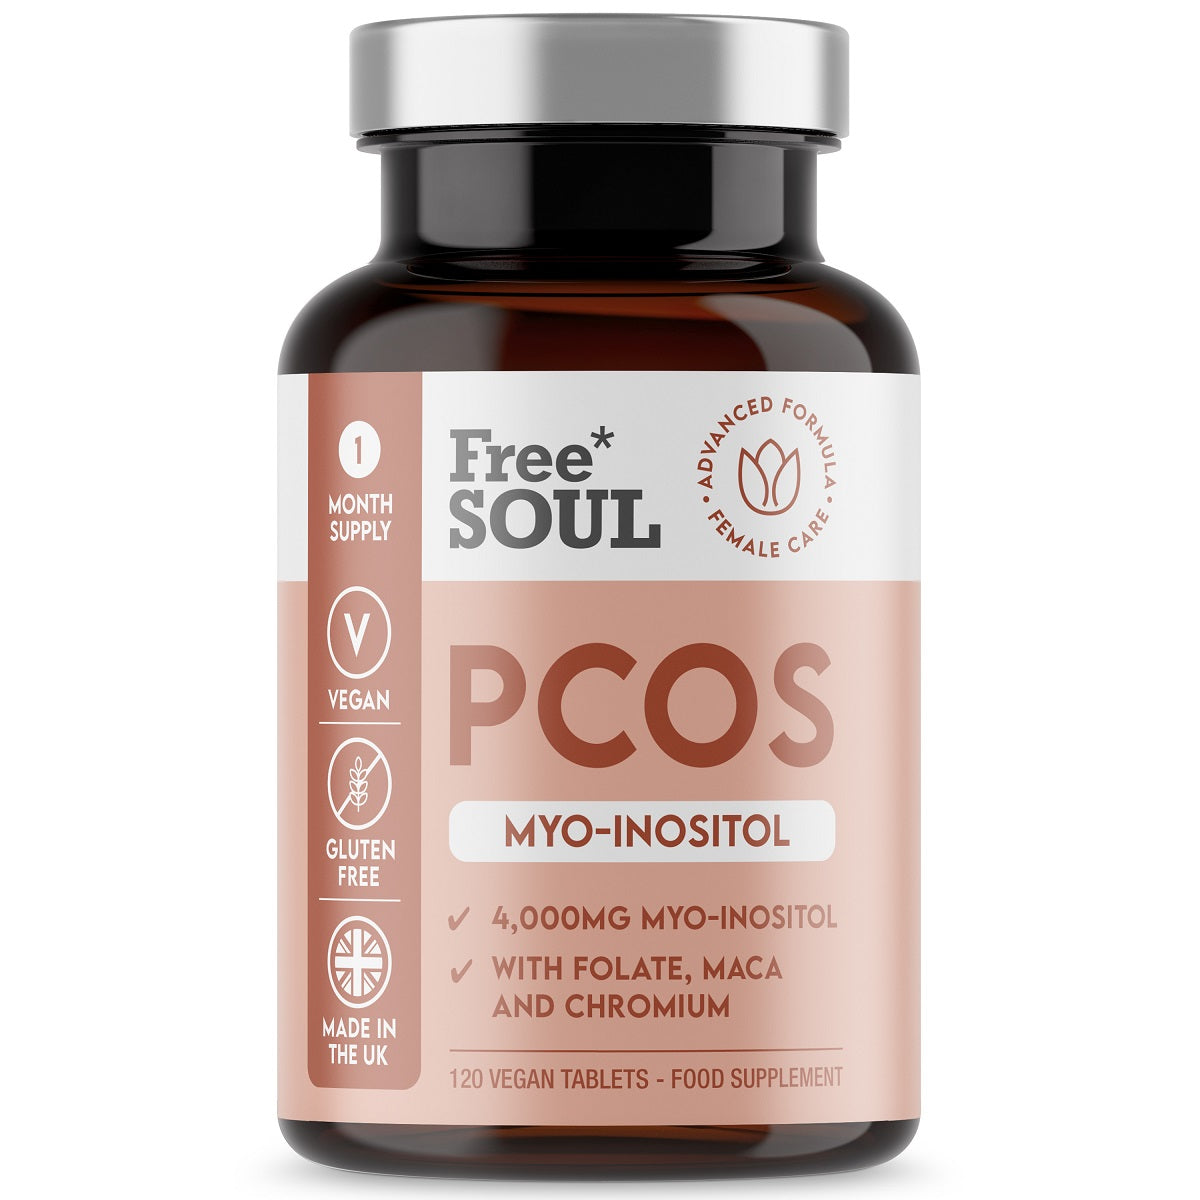 An image of Free Soul - PCOS Supplement